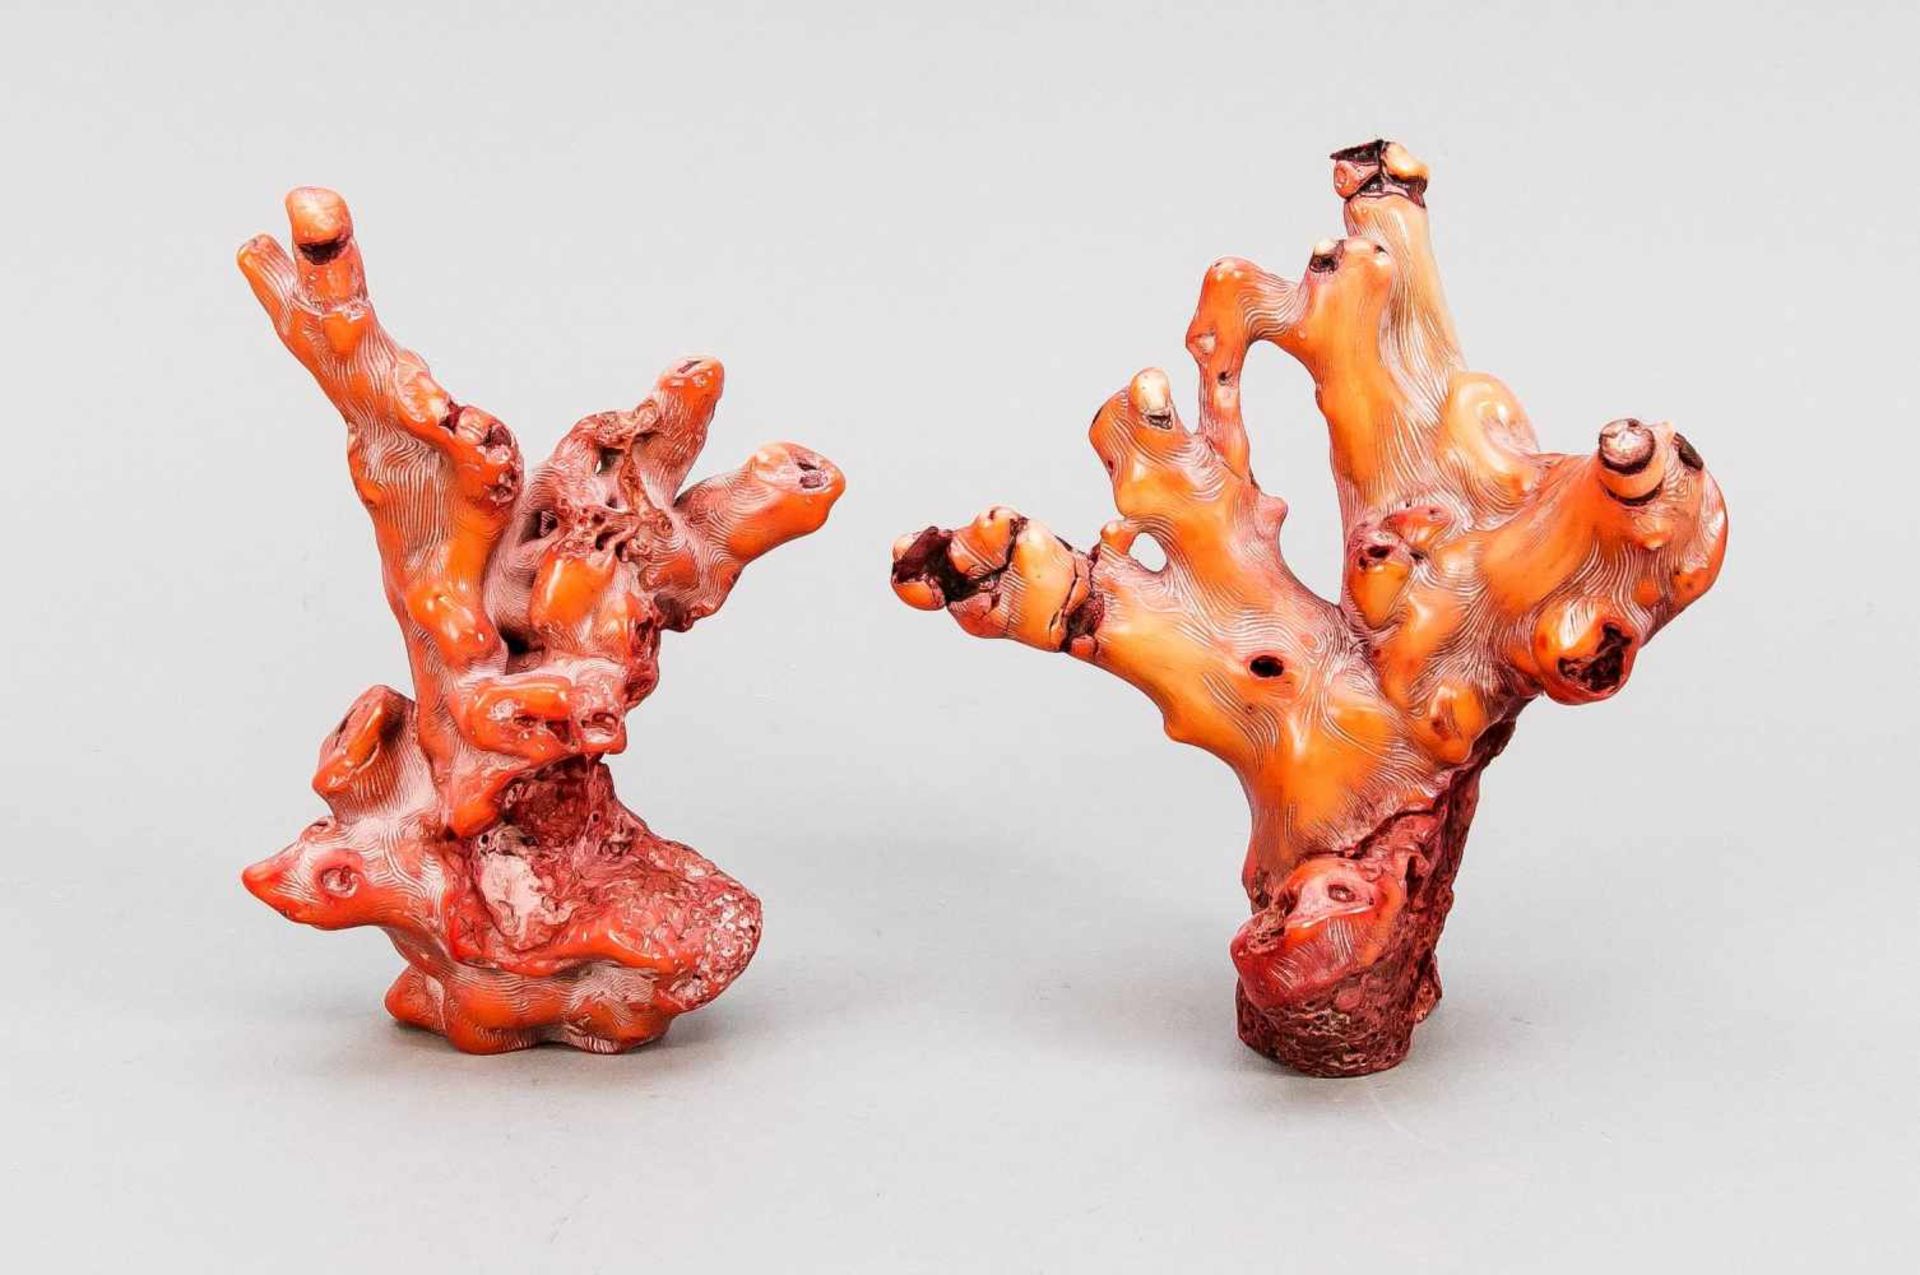 2 thick coral branches / Scholars Objects, China, 19th century, red coral with beautiful